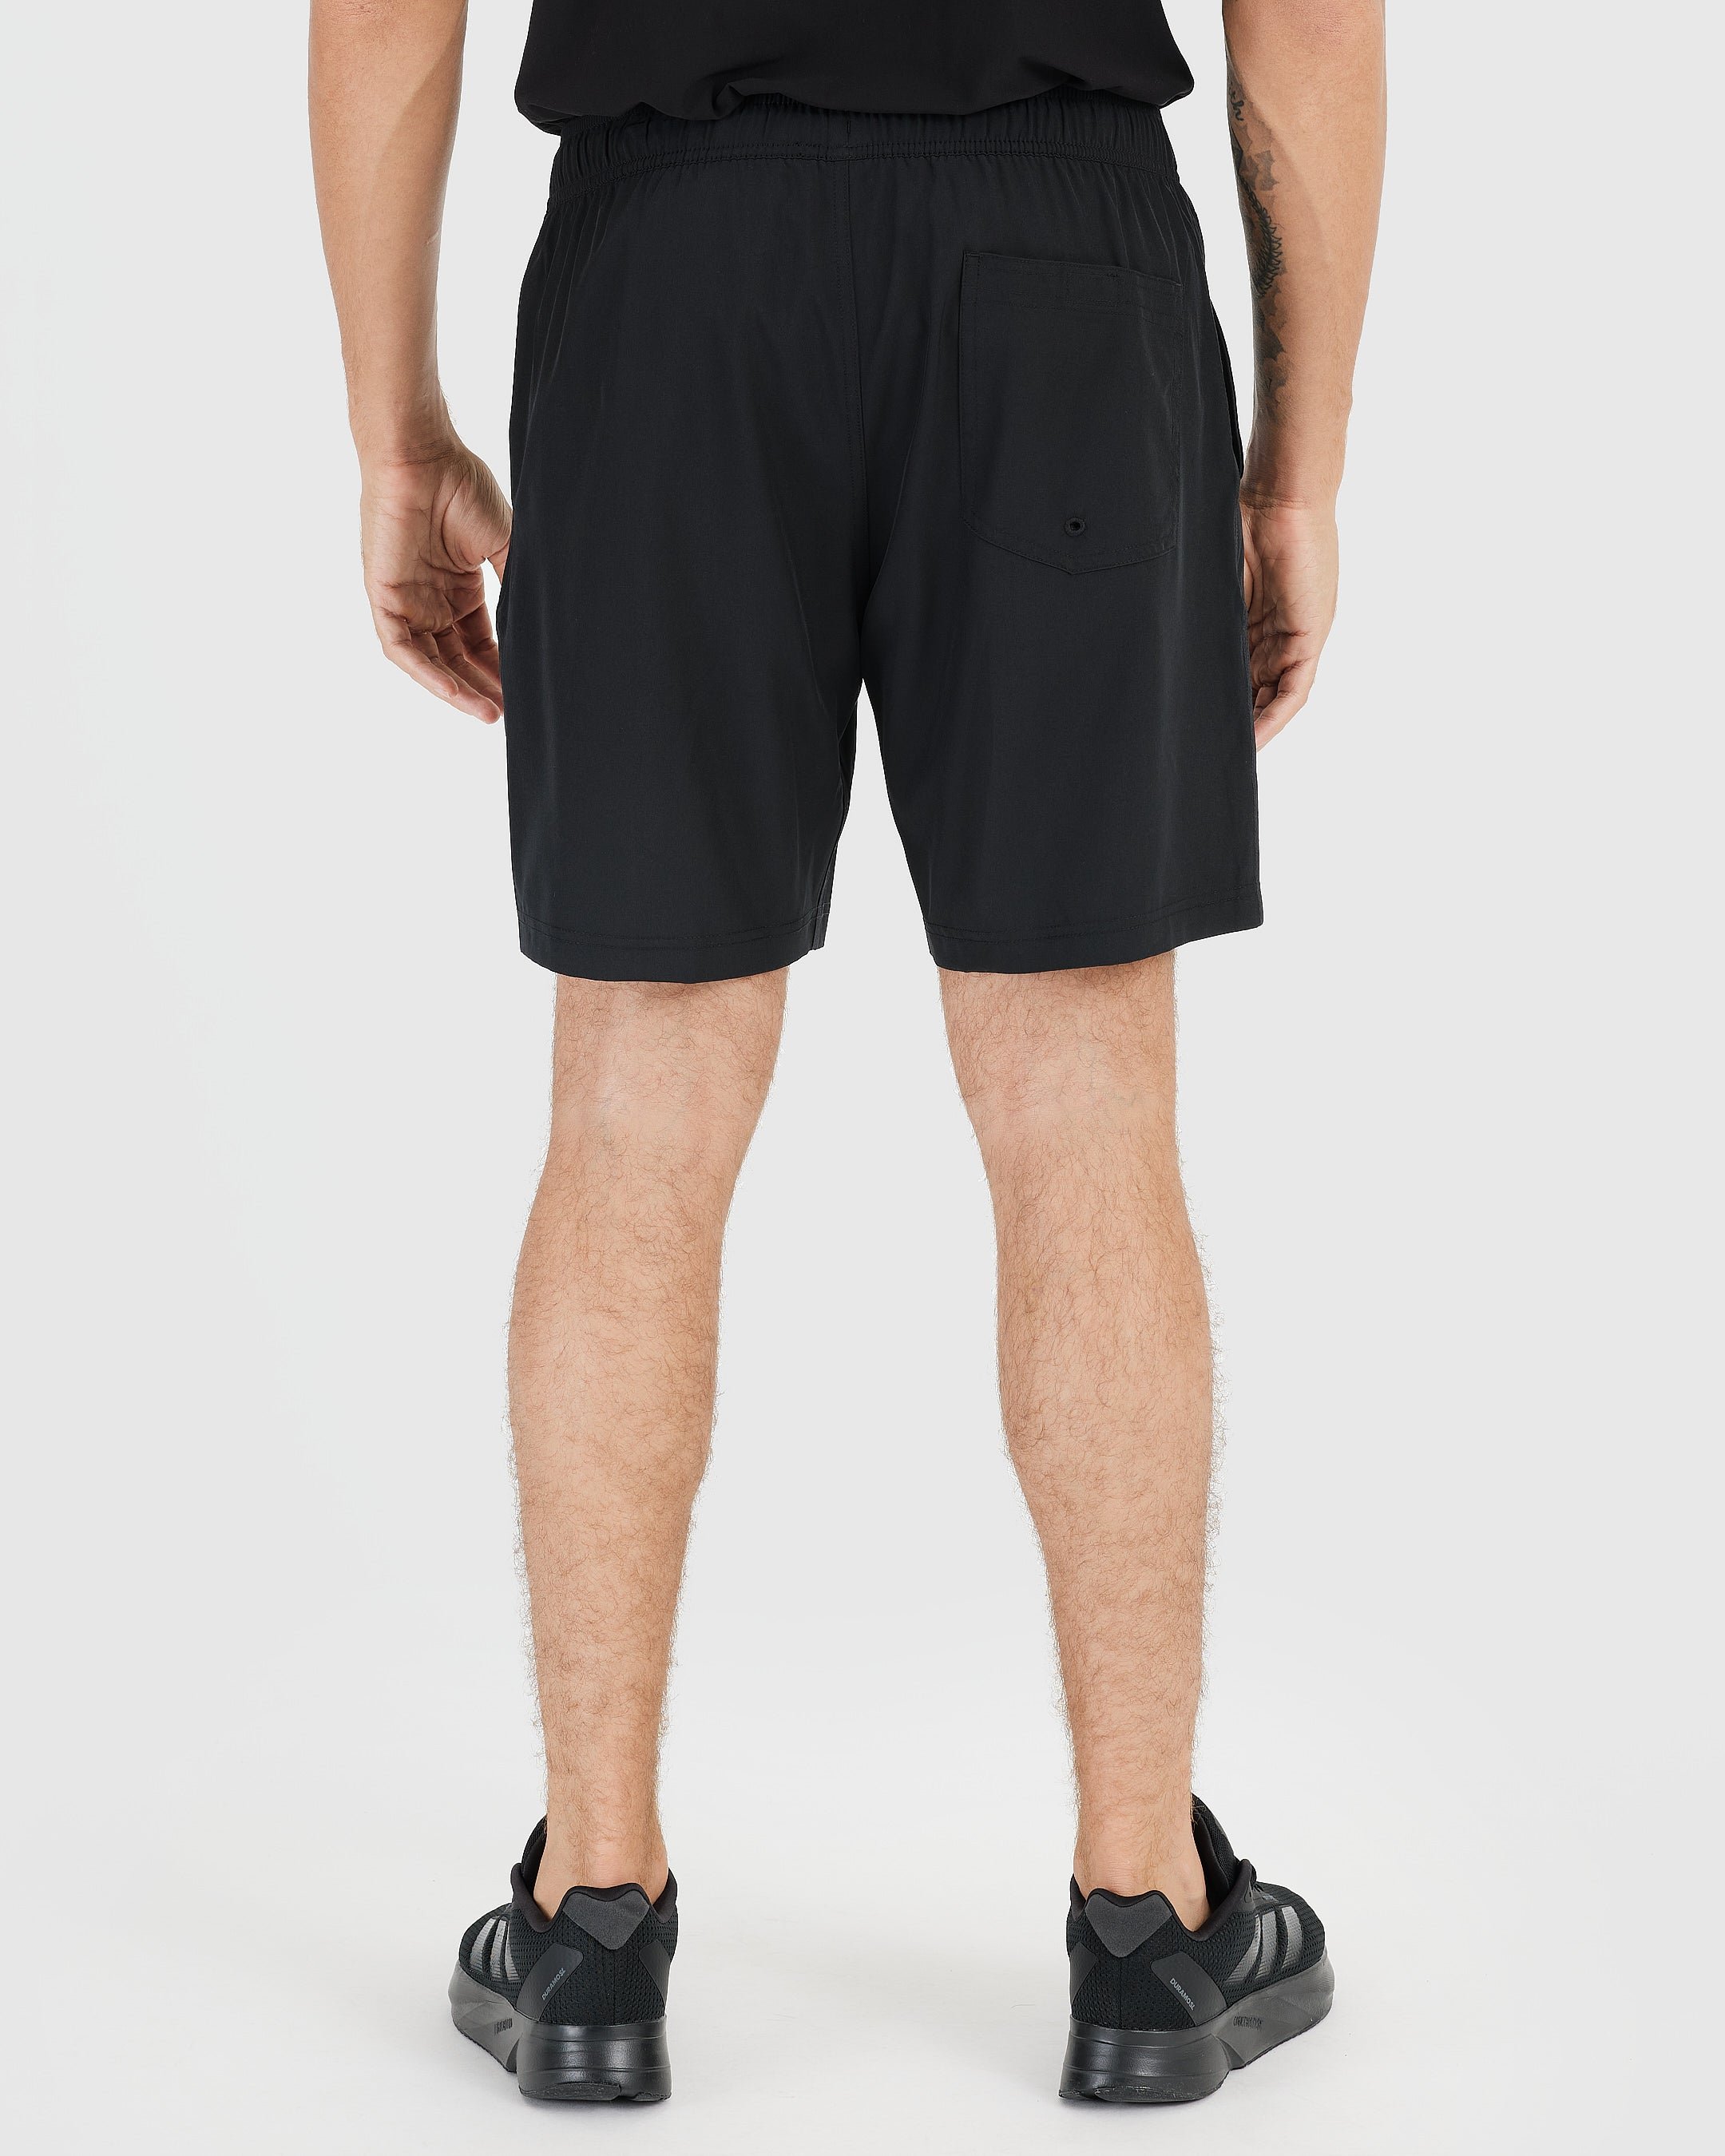 Dark Active Quick Dry Short with Liner 3-Pack